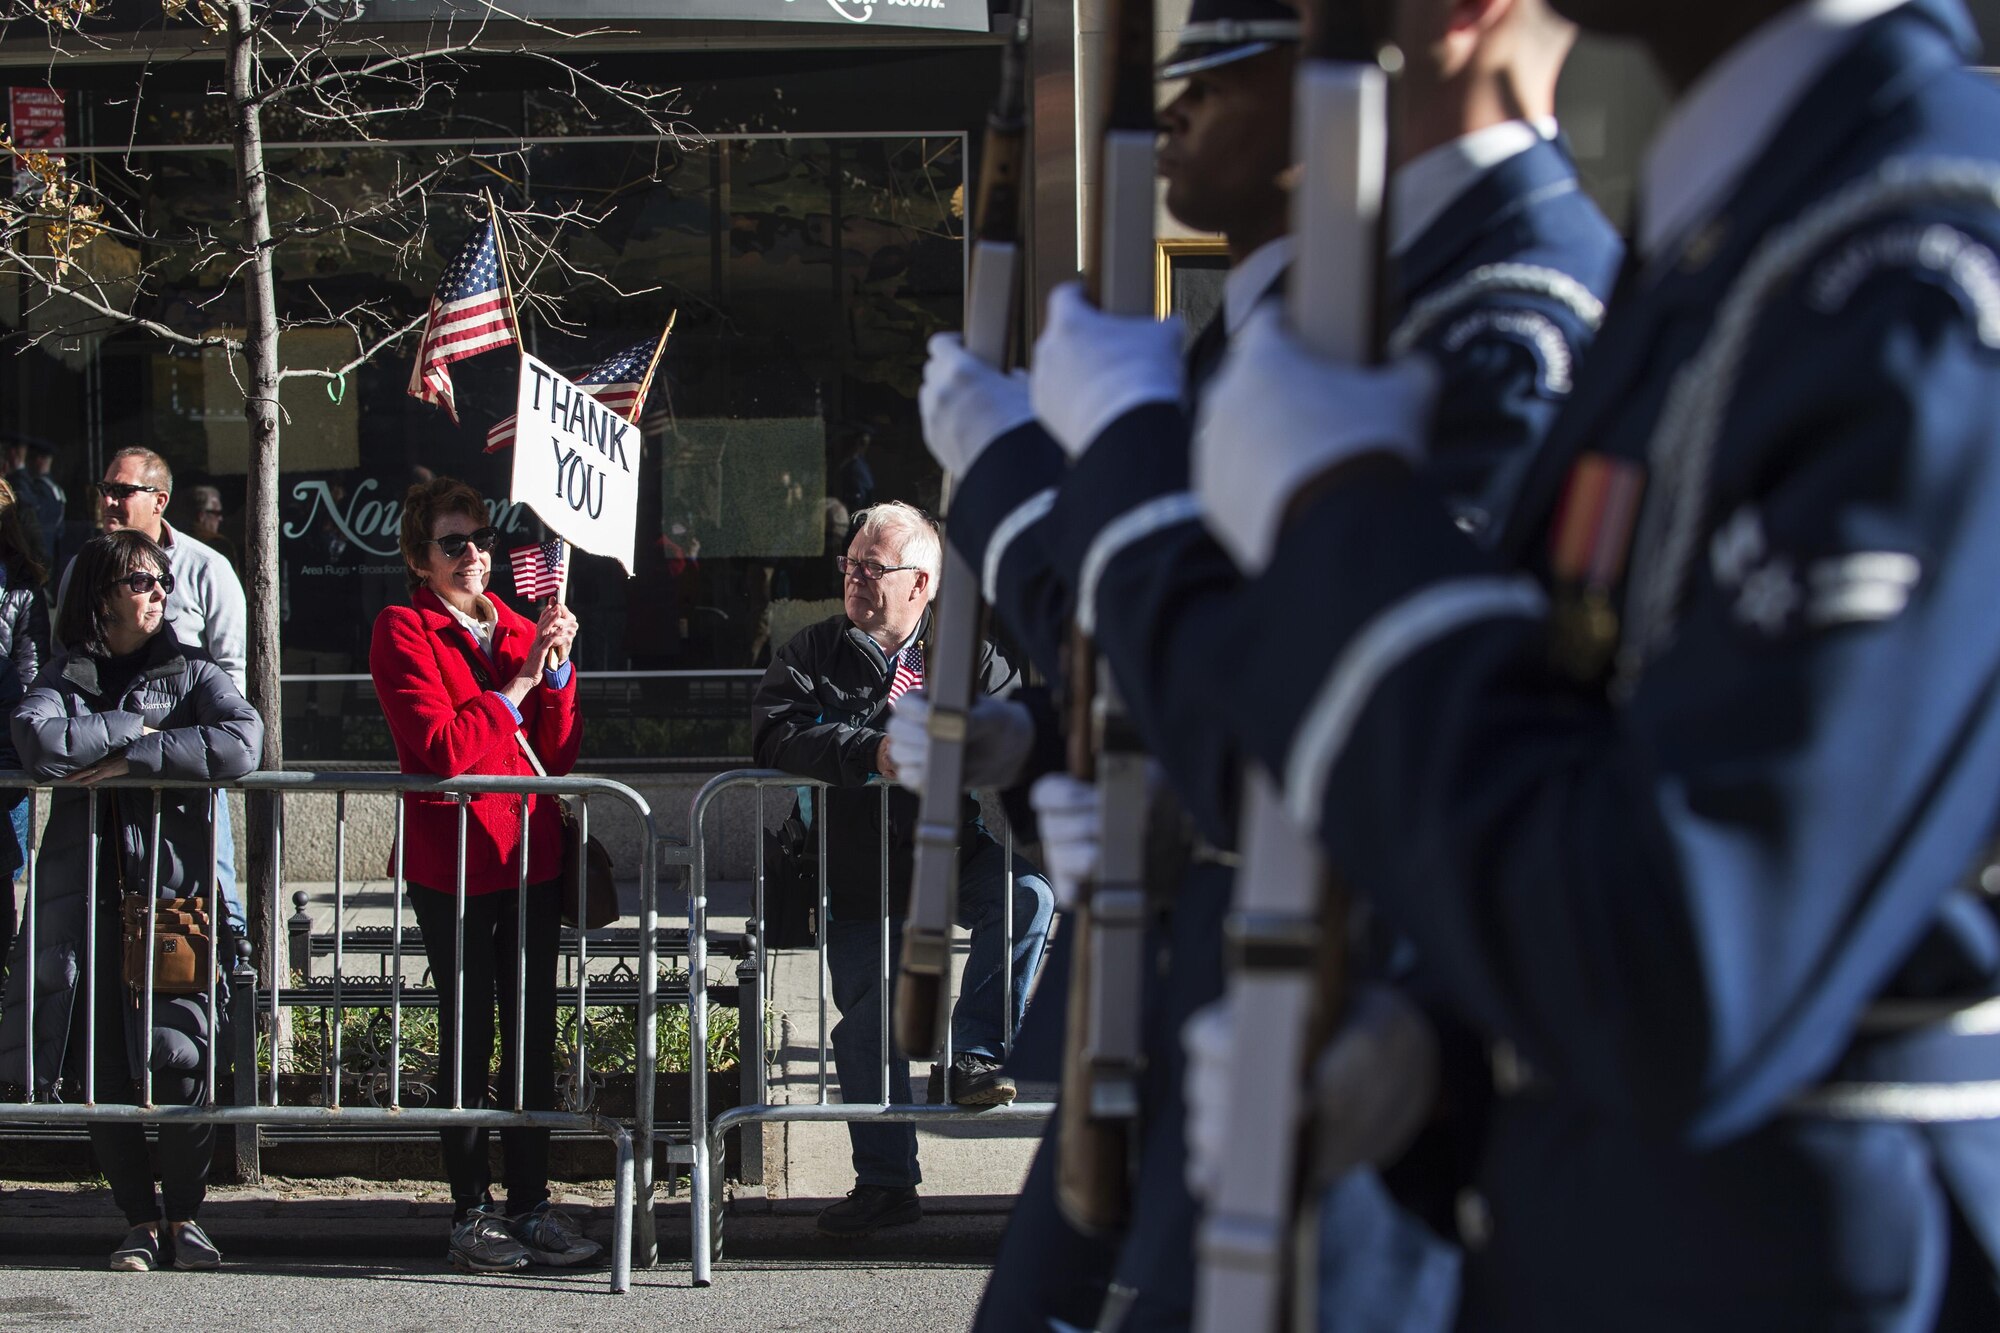 A parade viewer holds a sign of thanks while the U.S. Air Force Honor Guard march in the 2016 America’s Parade on Veterans Day down Fifth Avenue in Manhattan New York, Nov. 11, 2016. The parade had thousands of viewers lining Fifth Avenue with American flags and signs showing their support of past and present veterans. (U.S. Air Force photo by Senior Airman Philip Bryant)